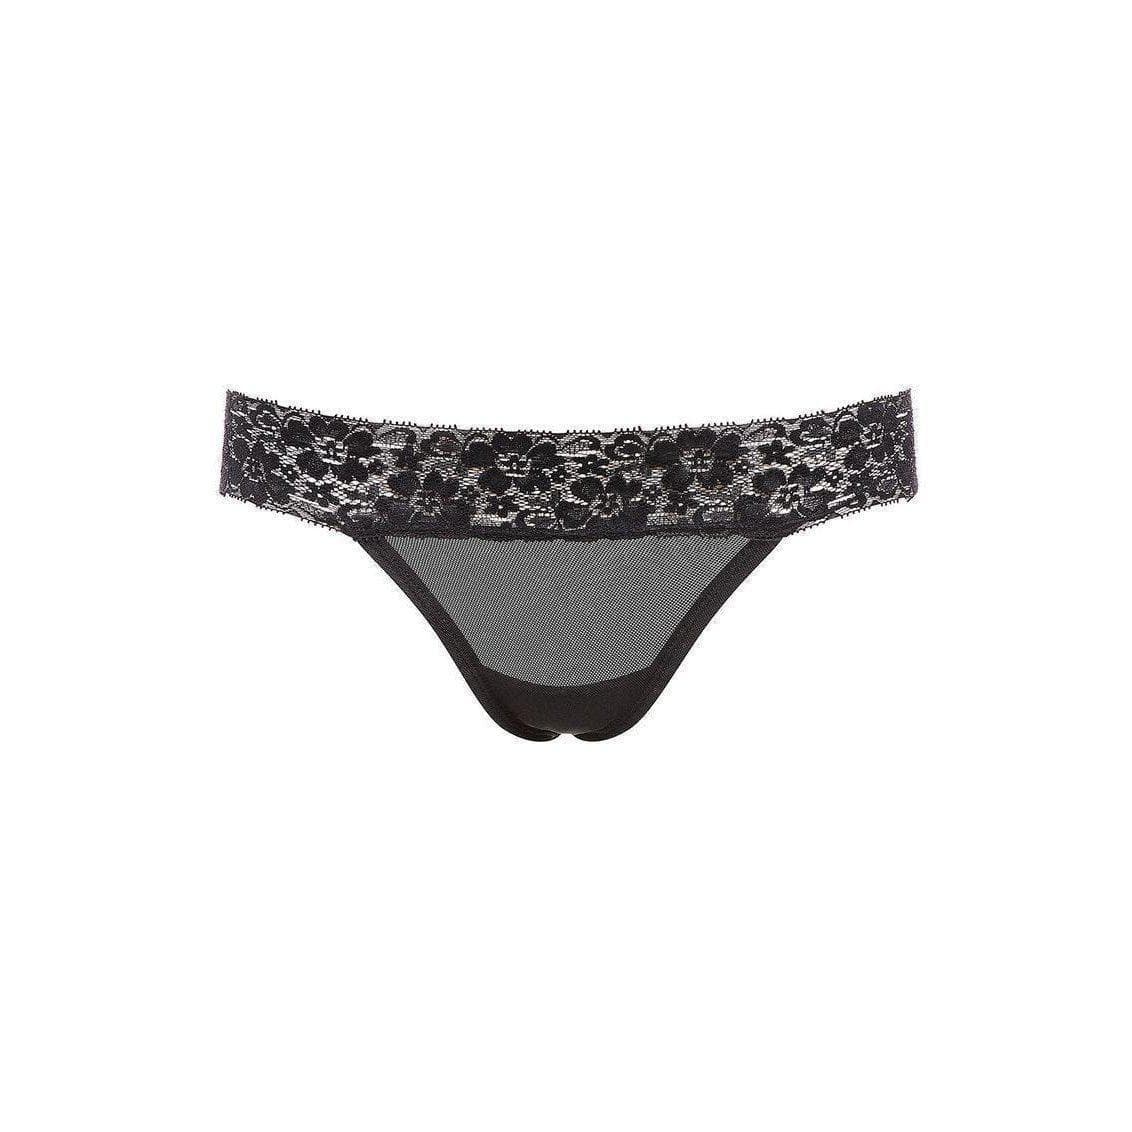 Barely Bare Strappy Butt Panty Black One Size - Romantic Blessings